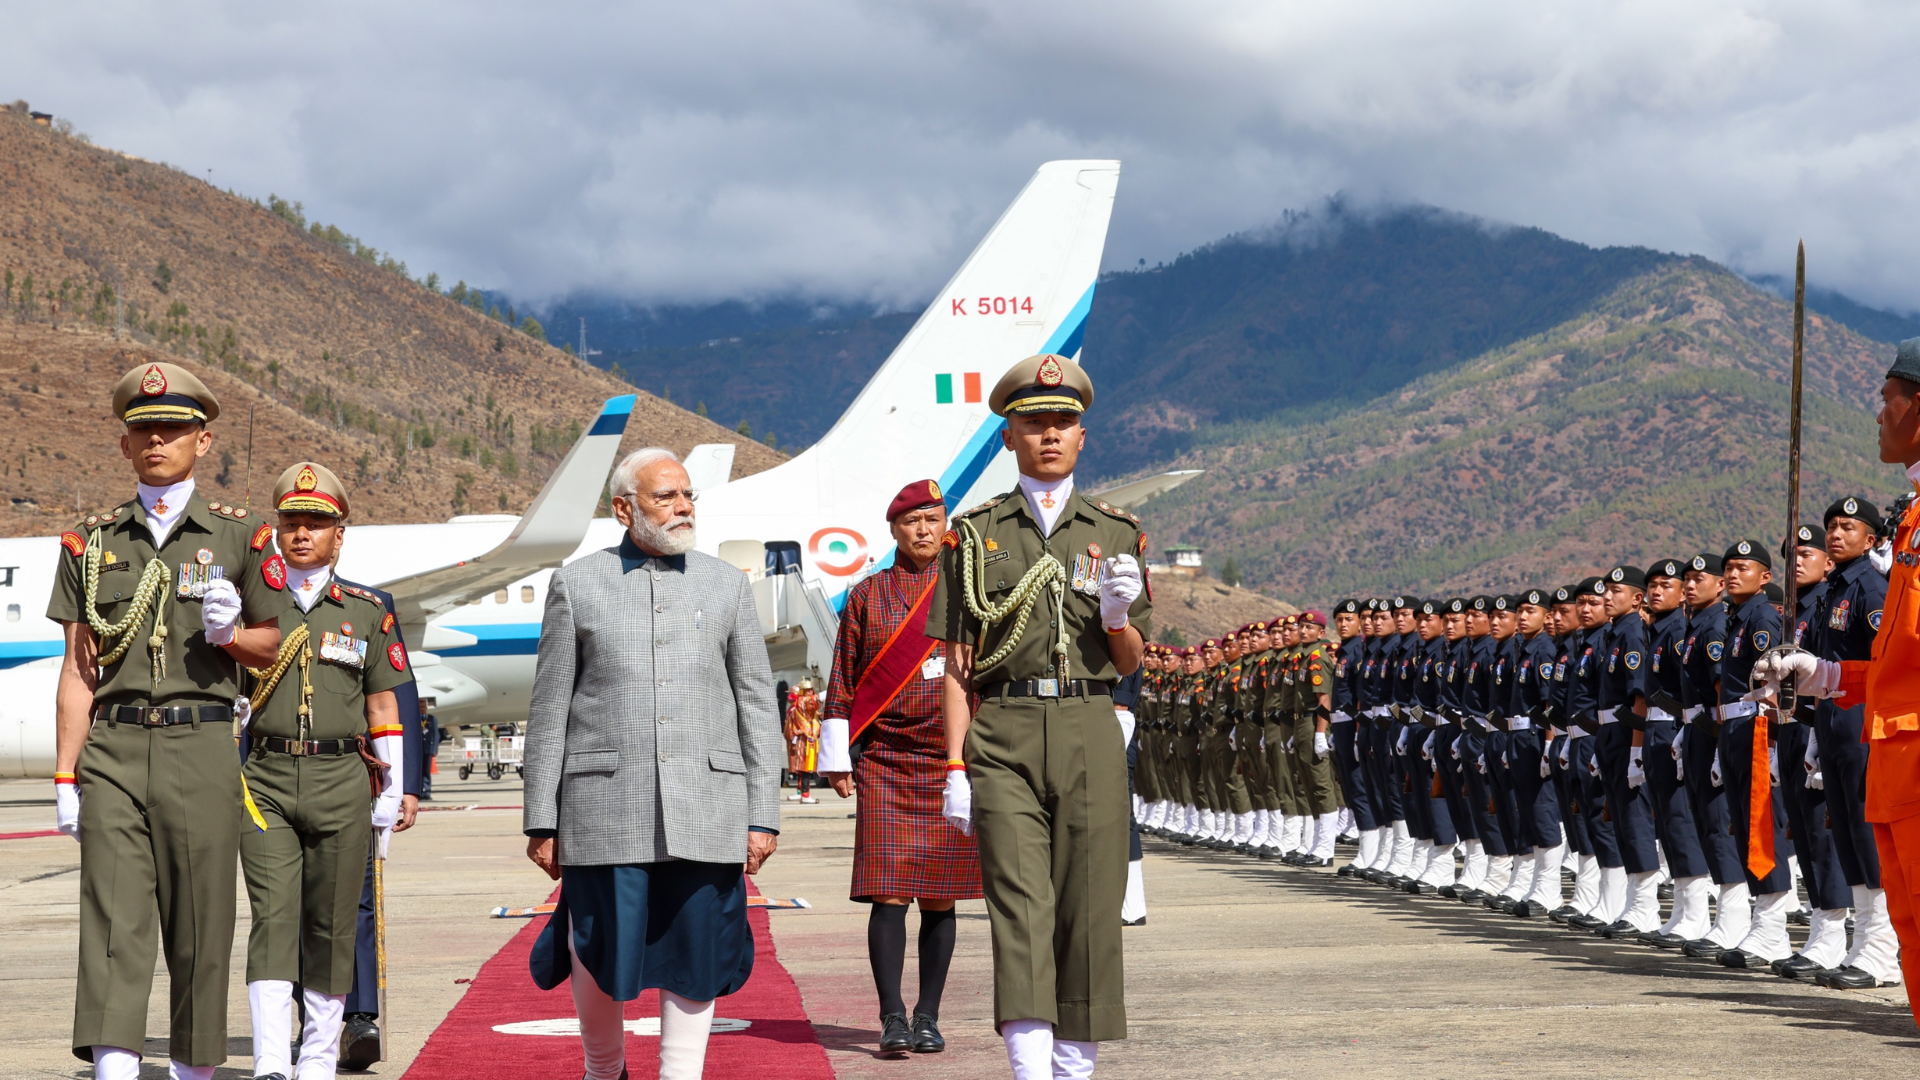 PM Modi Becomes the 1st Foreign Head of Government To Receive Bhutan’s Highest Civilian Honour